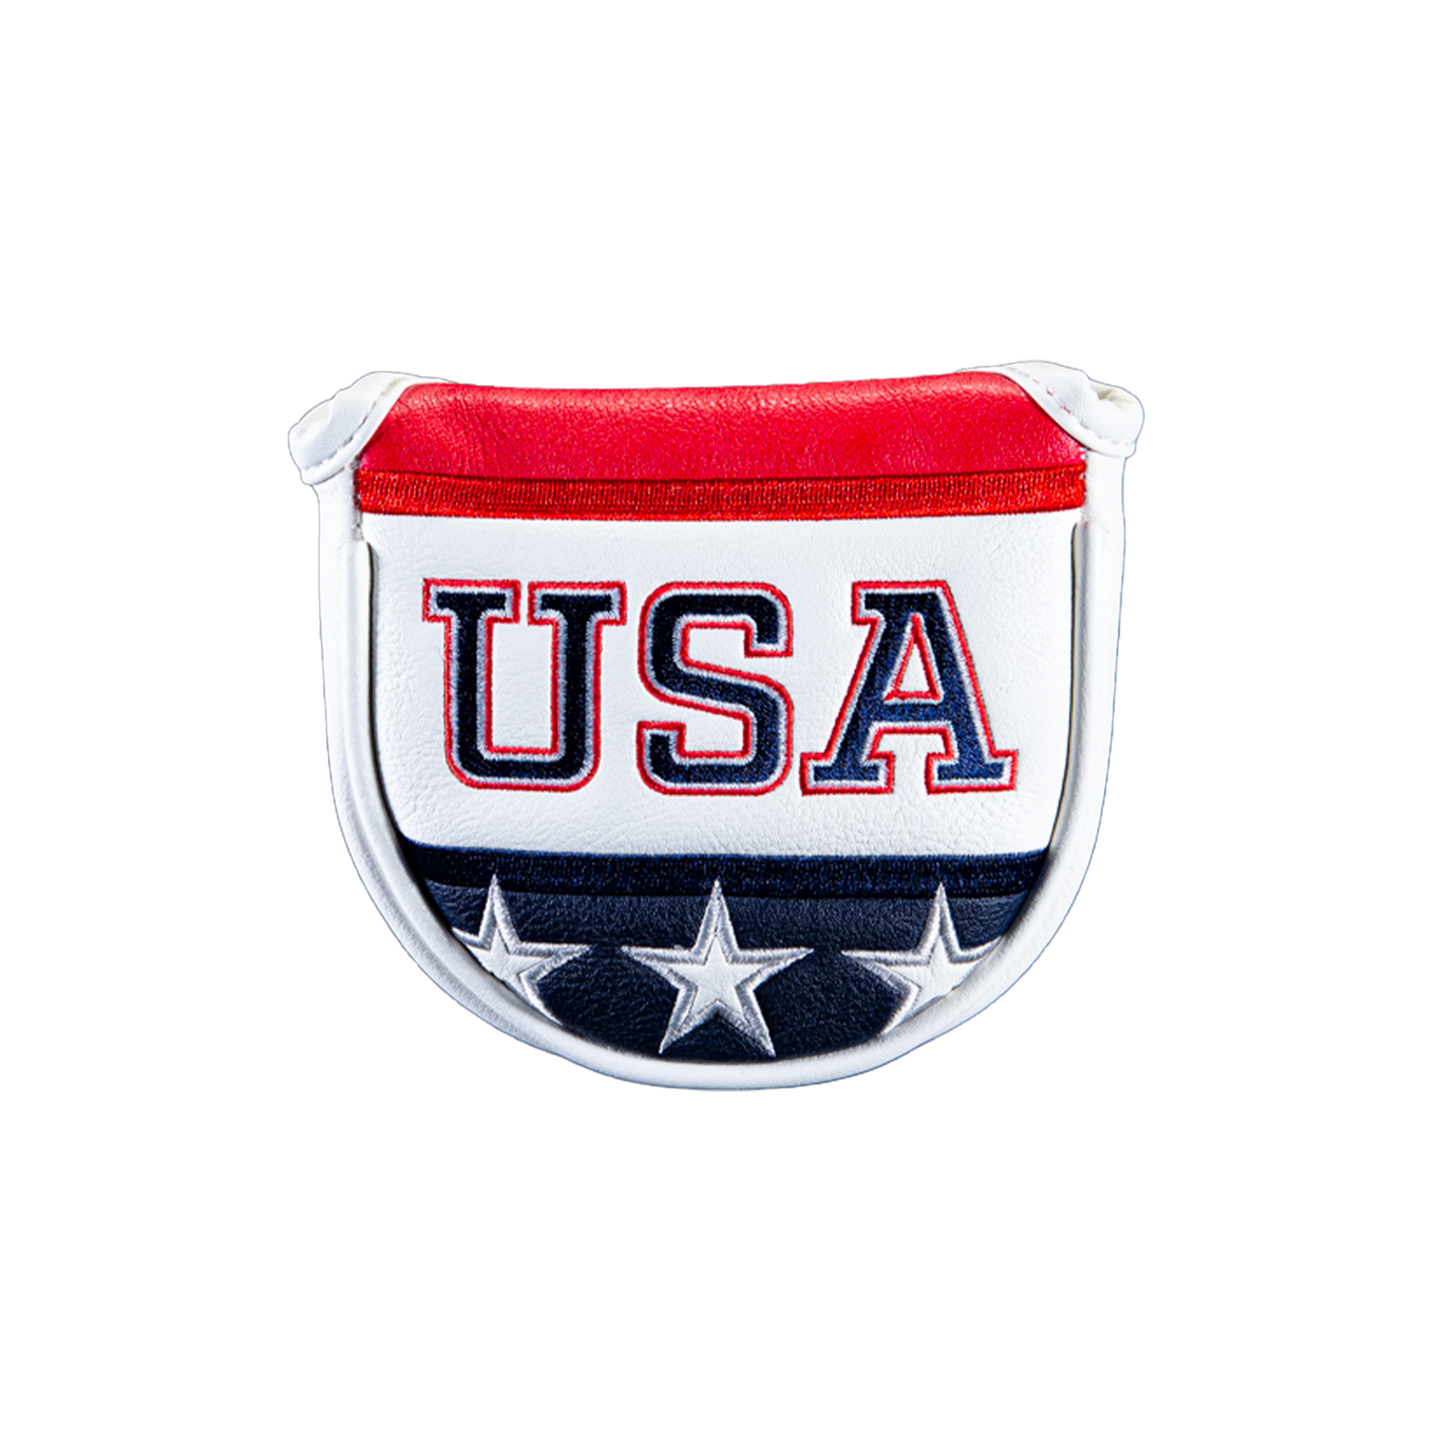 USA "Stars" Mallet Putter Cover